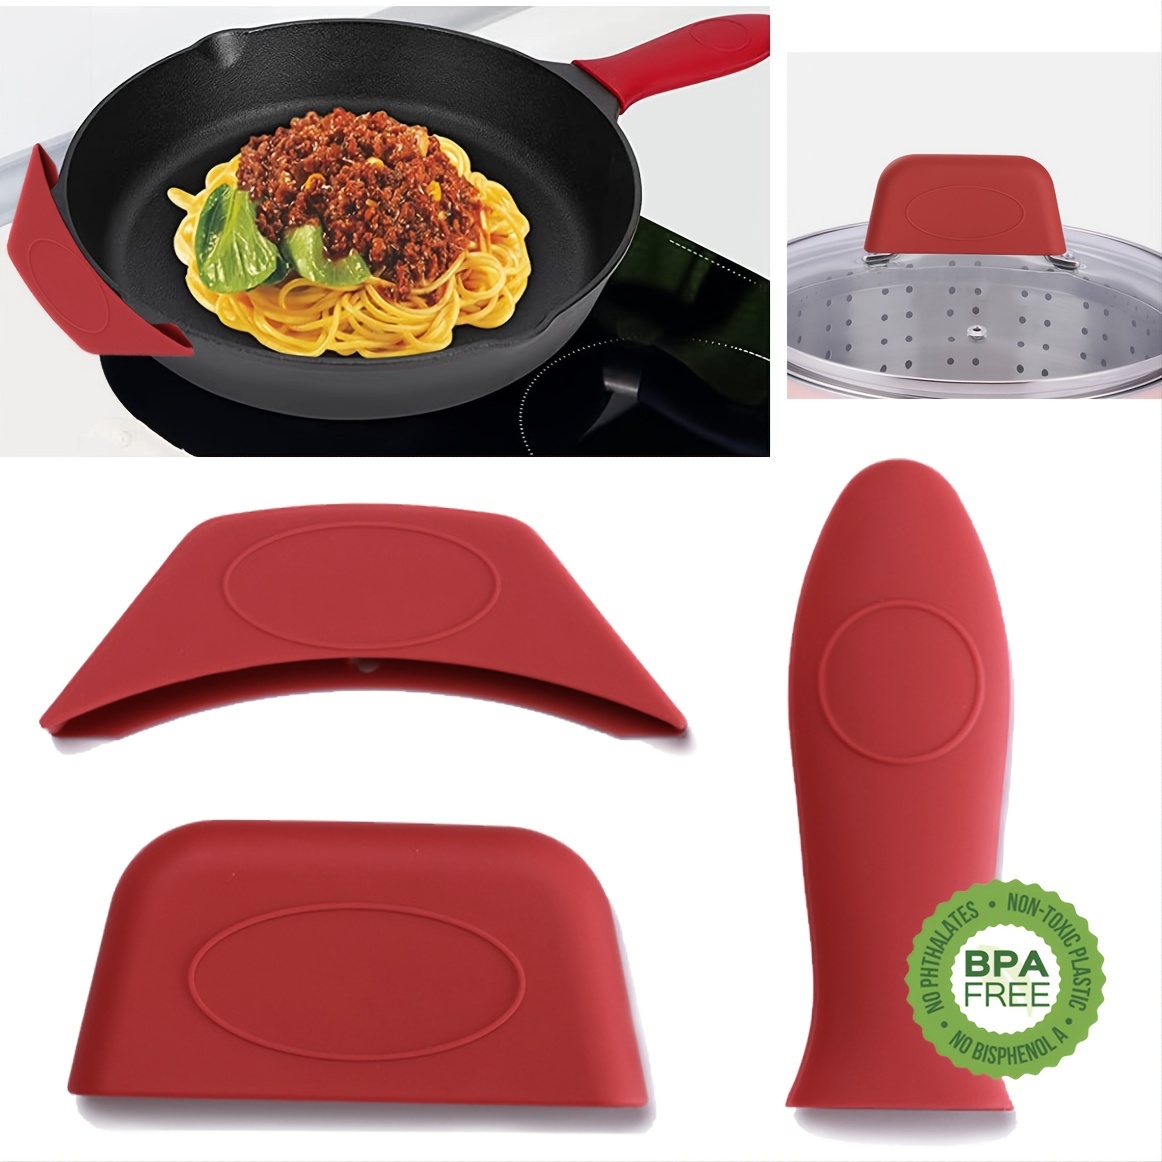 3Pcs Silicone Pot Handle Holder Cast Iron Skillet Holders Cover